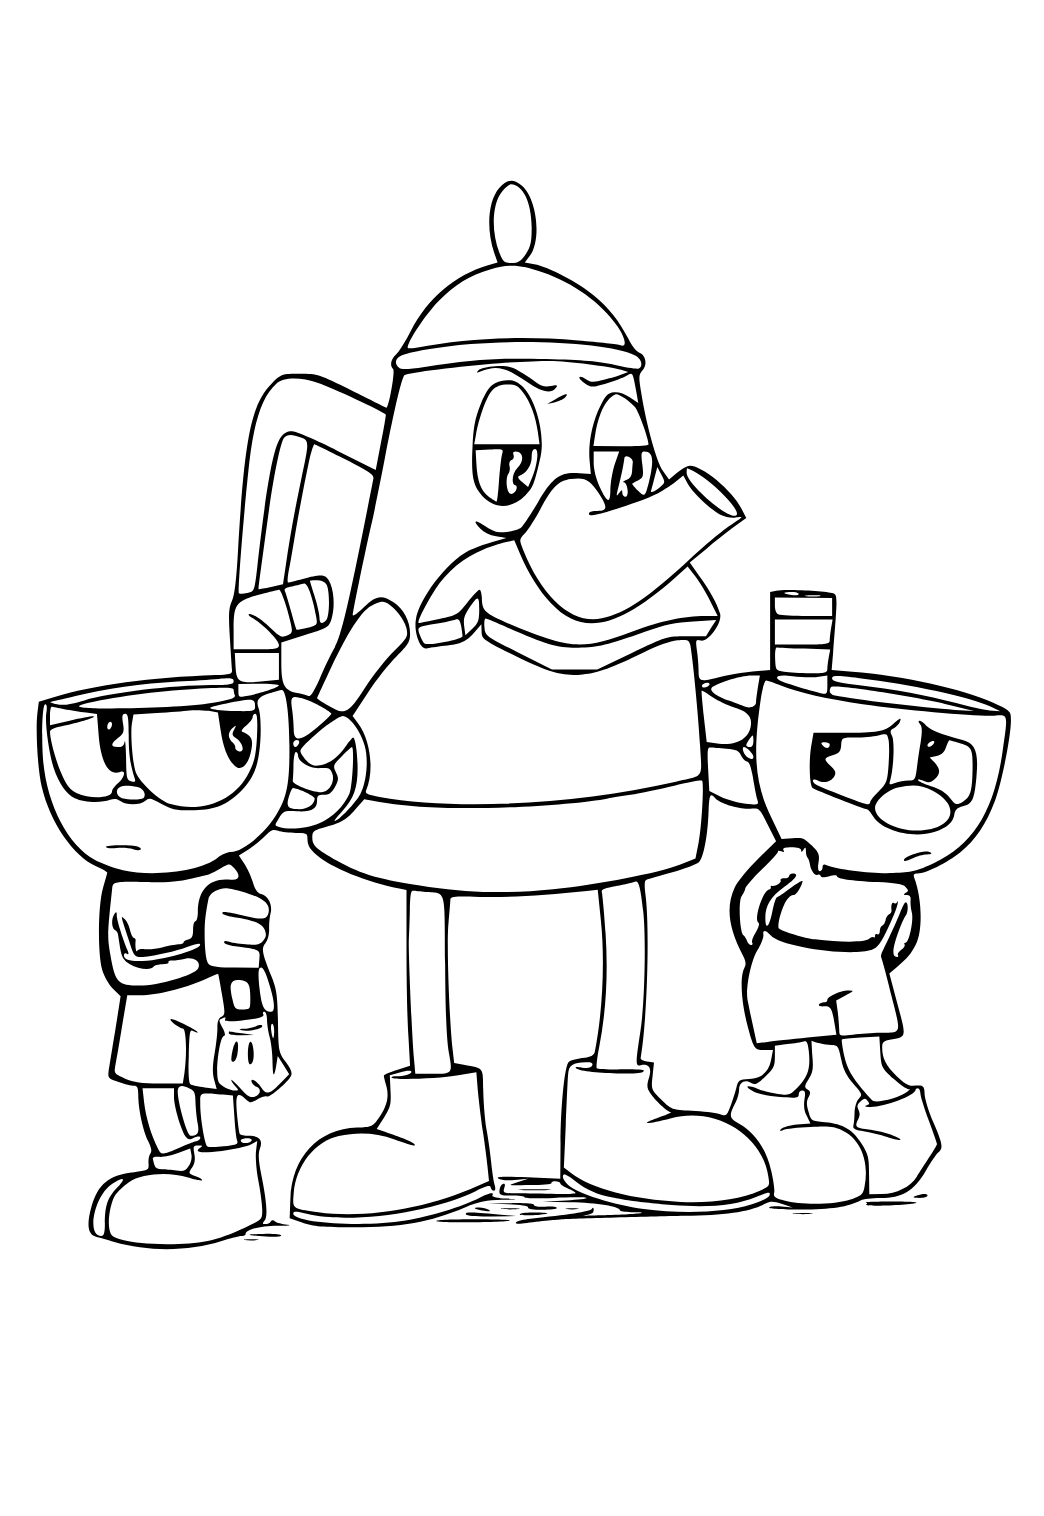 Free printable cuphead characters coloring page for adults and kids